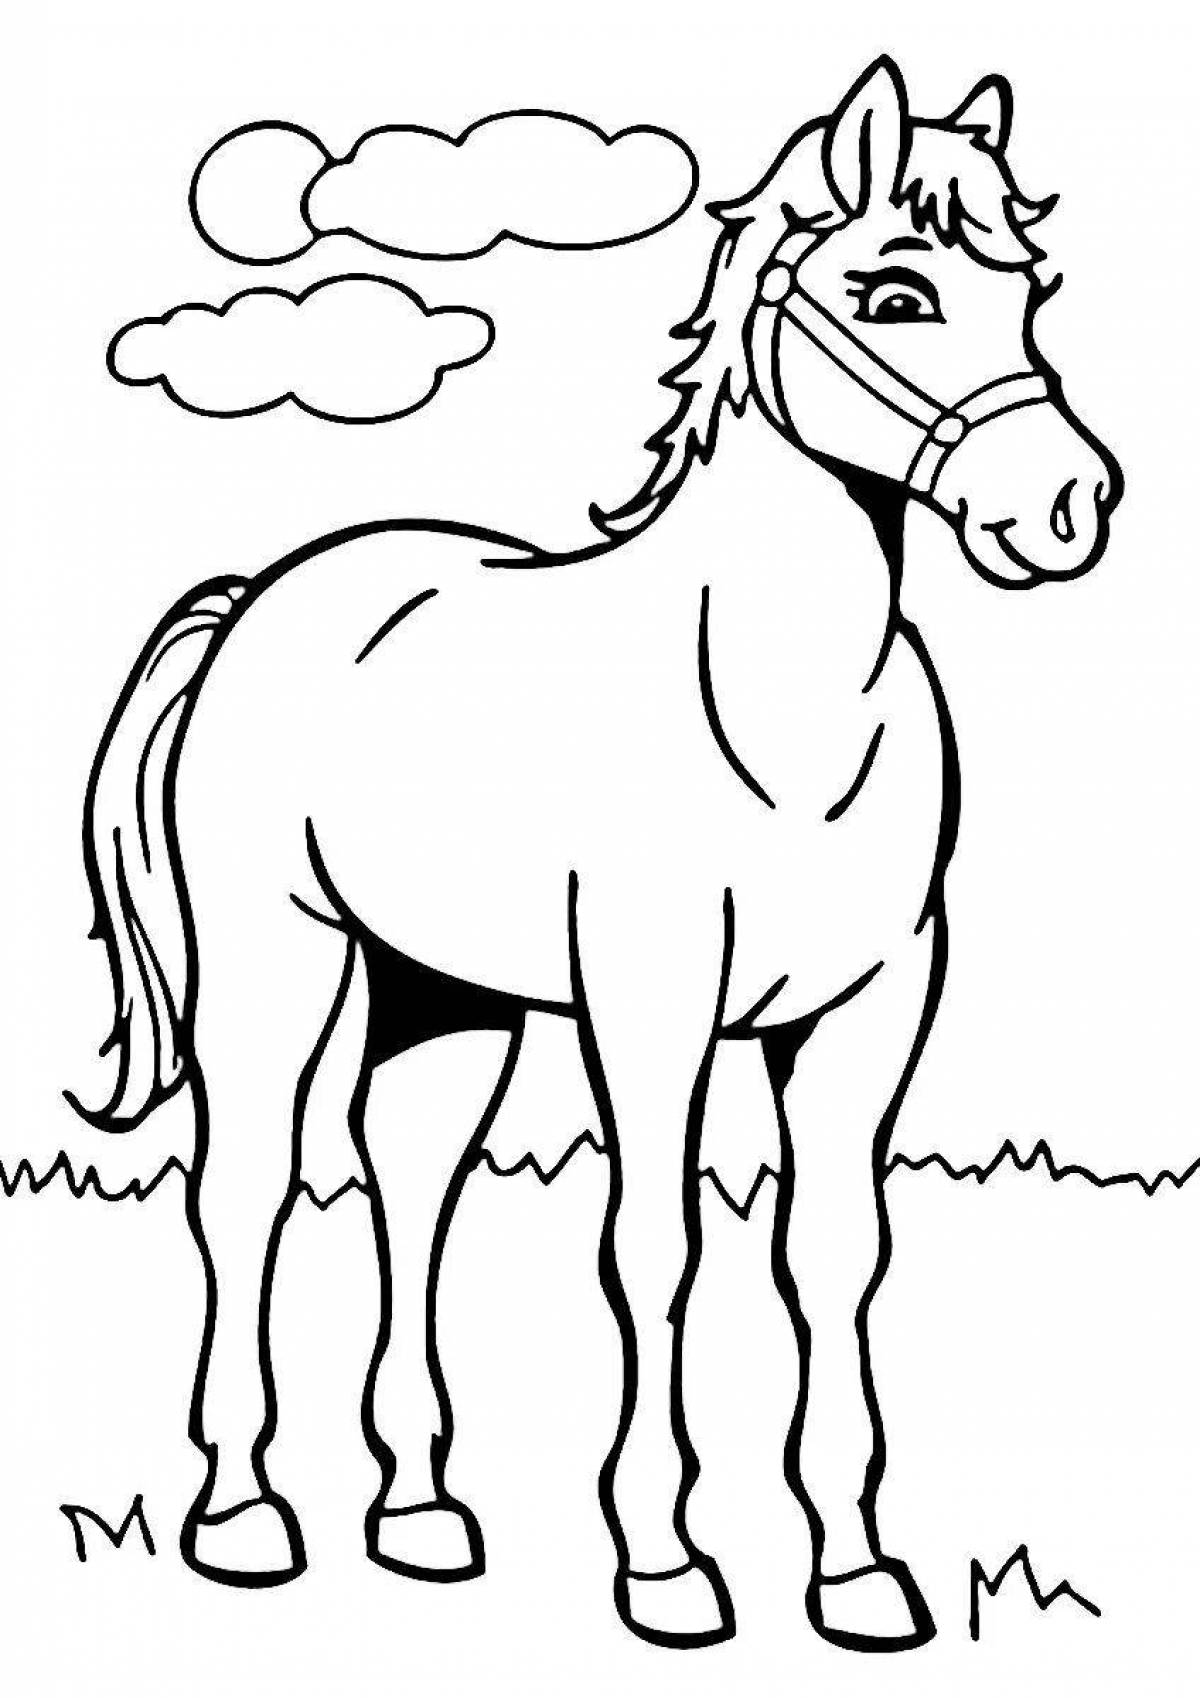 Fun horse drawing for kids